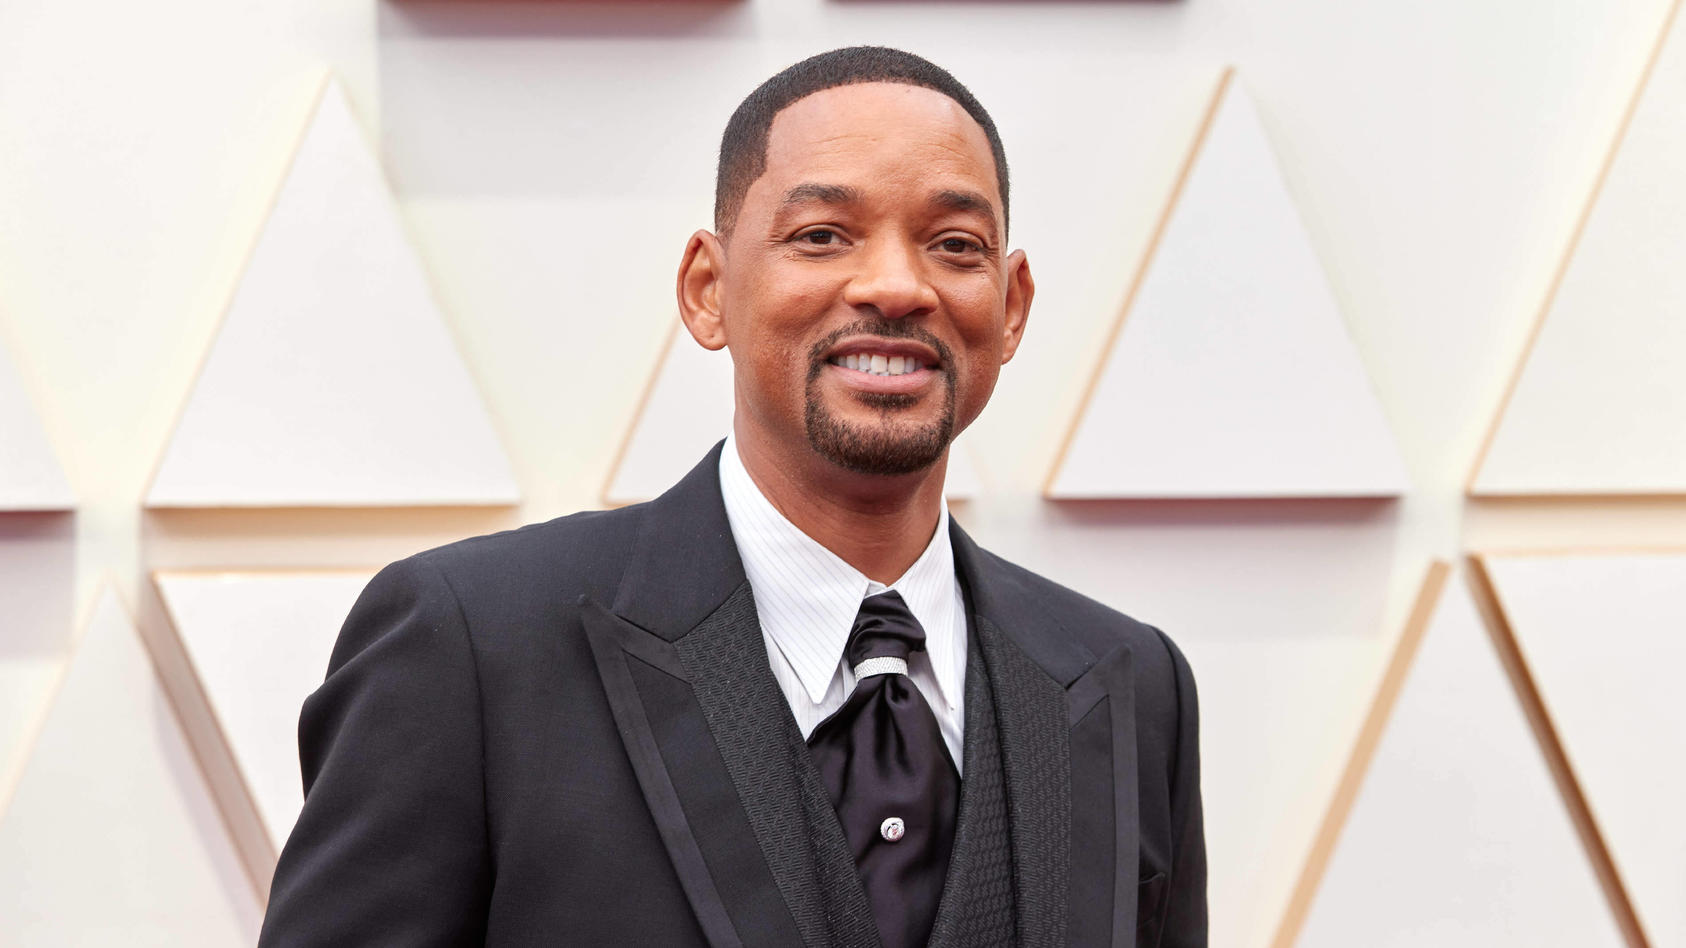  Oscar nominee Will Smith arrives on the red carpet of the 94th Oscars at the Dolby Theatre at Ovation Hollywood in Los Angeles, CA, on Sunday, March 27, 2022. PUBLICATIONxINxGERxSUIxAUTxONLY Copyright: xx 34342-596THA